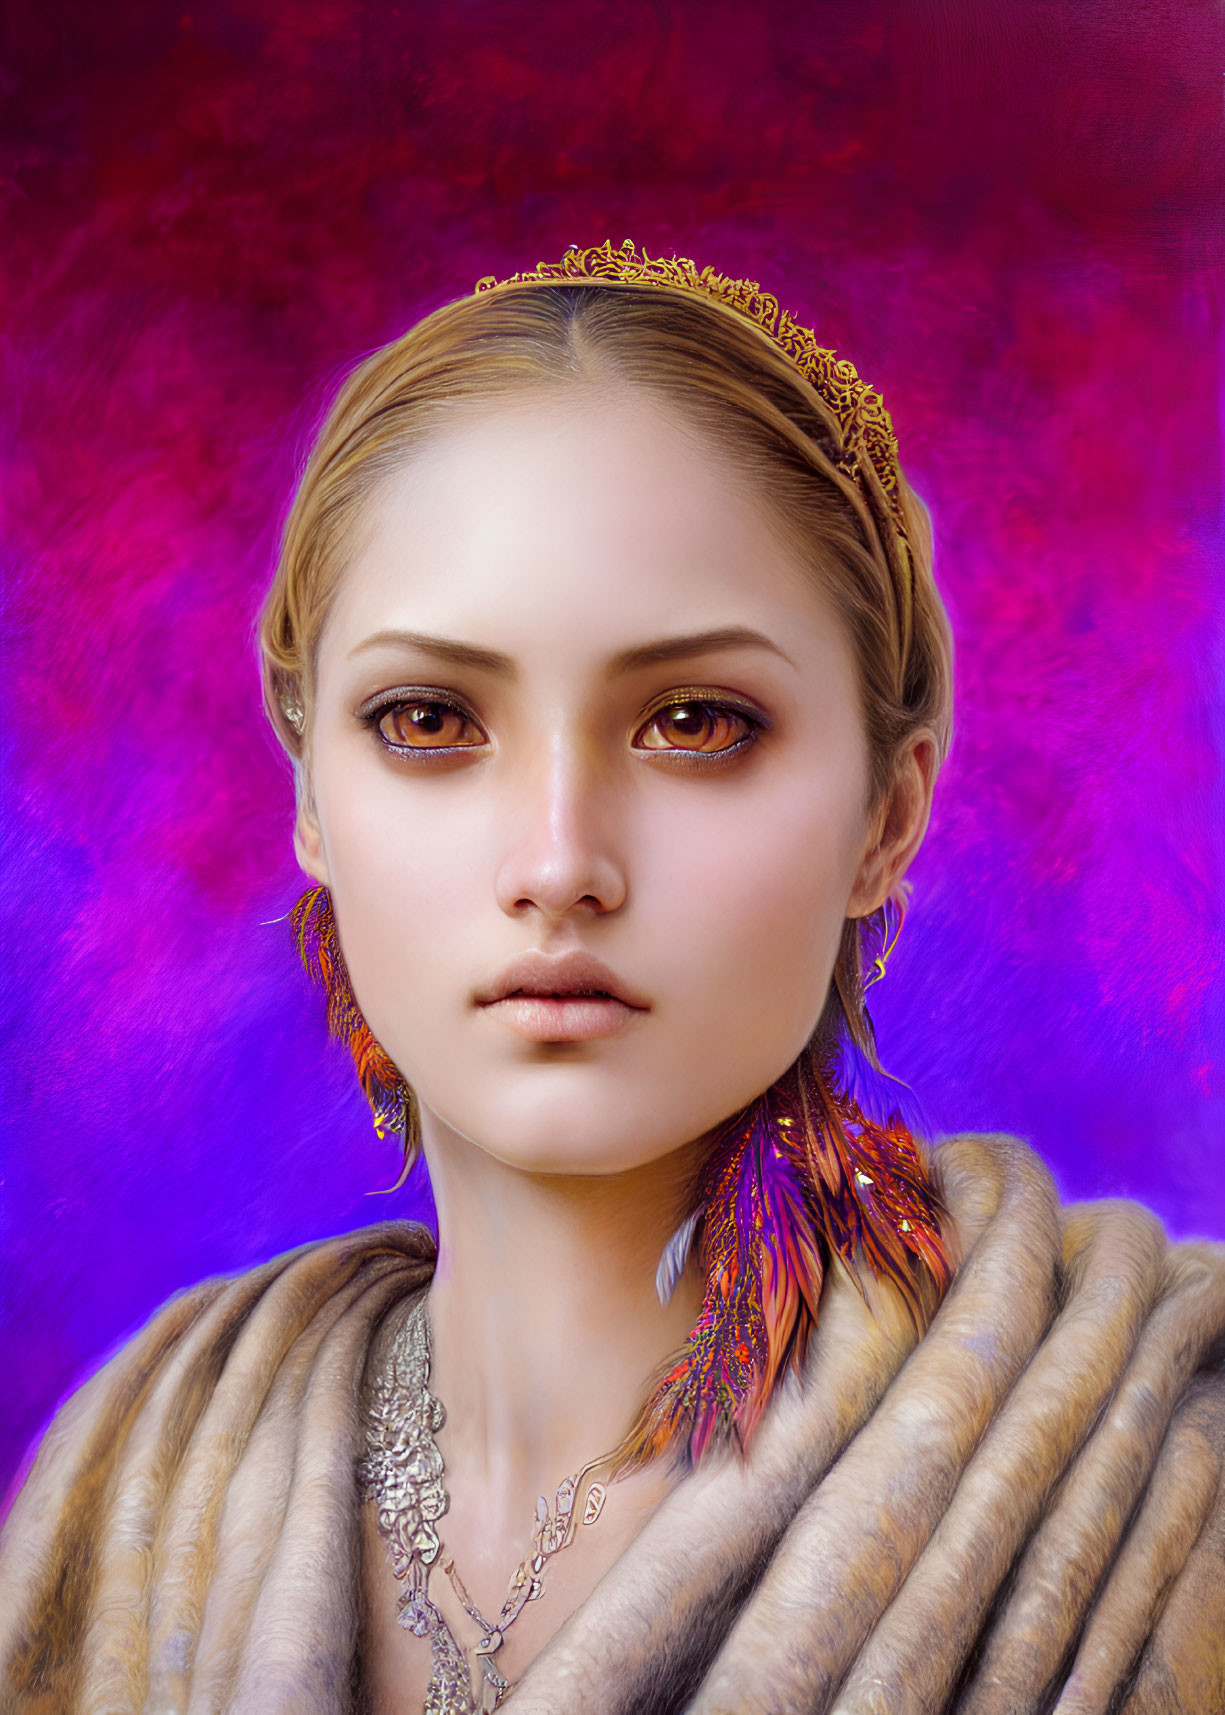 Digital painting of young woman with gold crown, brown eyes, feather earrings, and fur wrap on purple